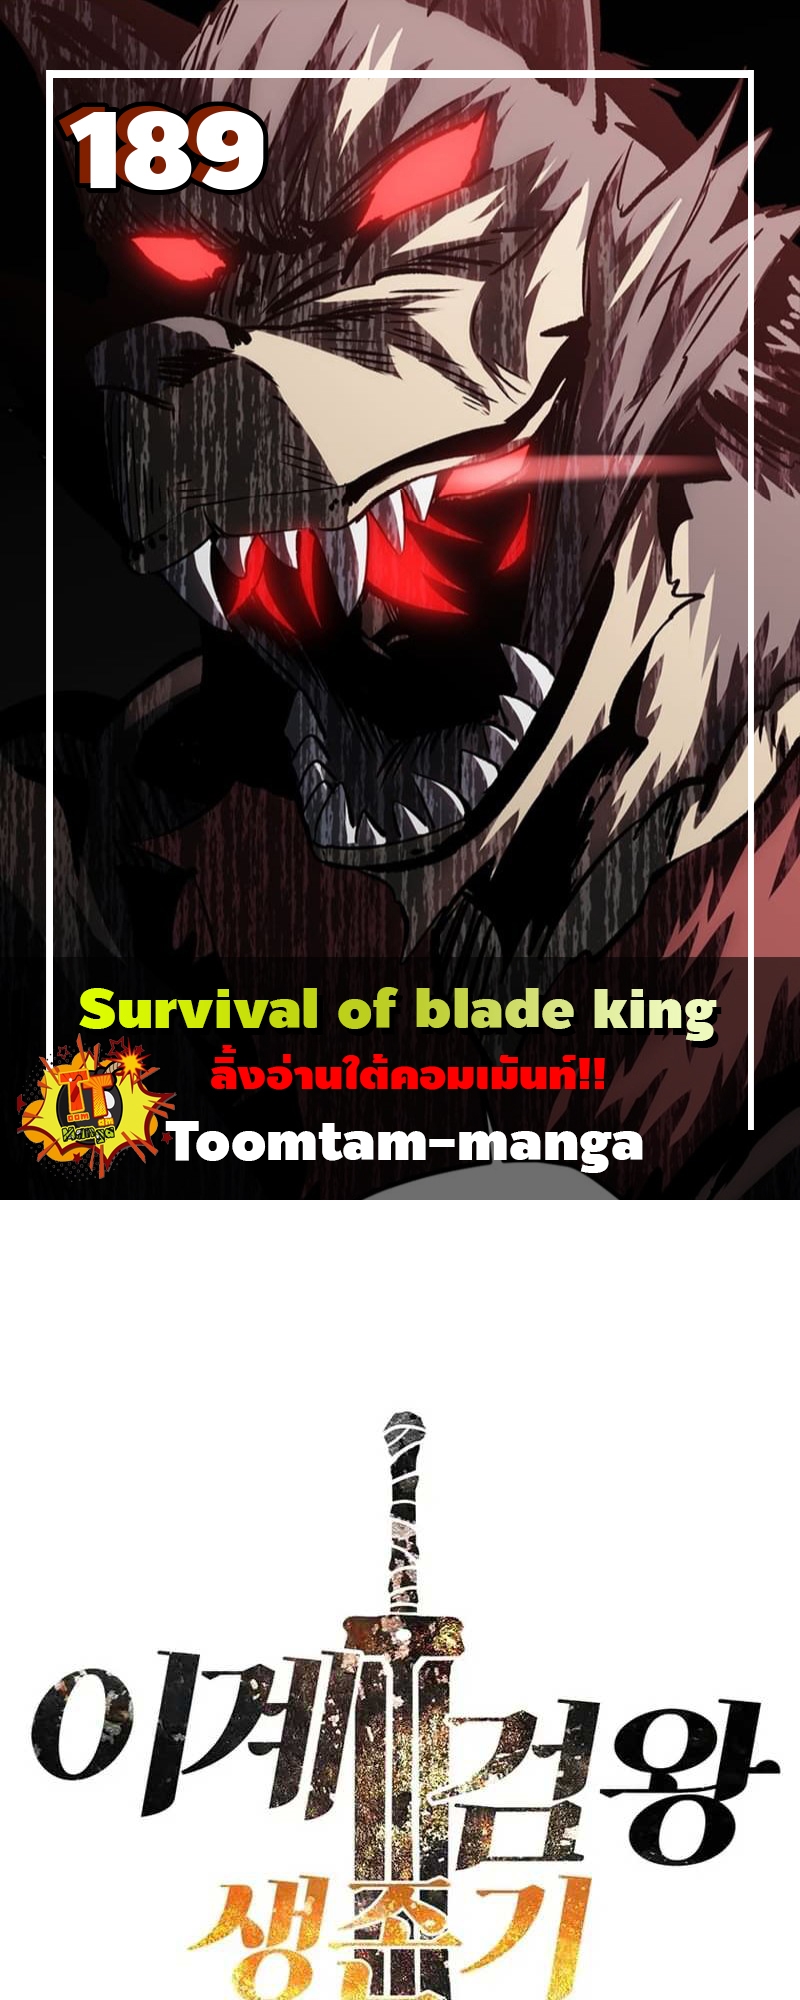 Survival of blade king 189 27 1 25670001